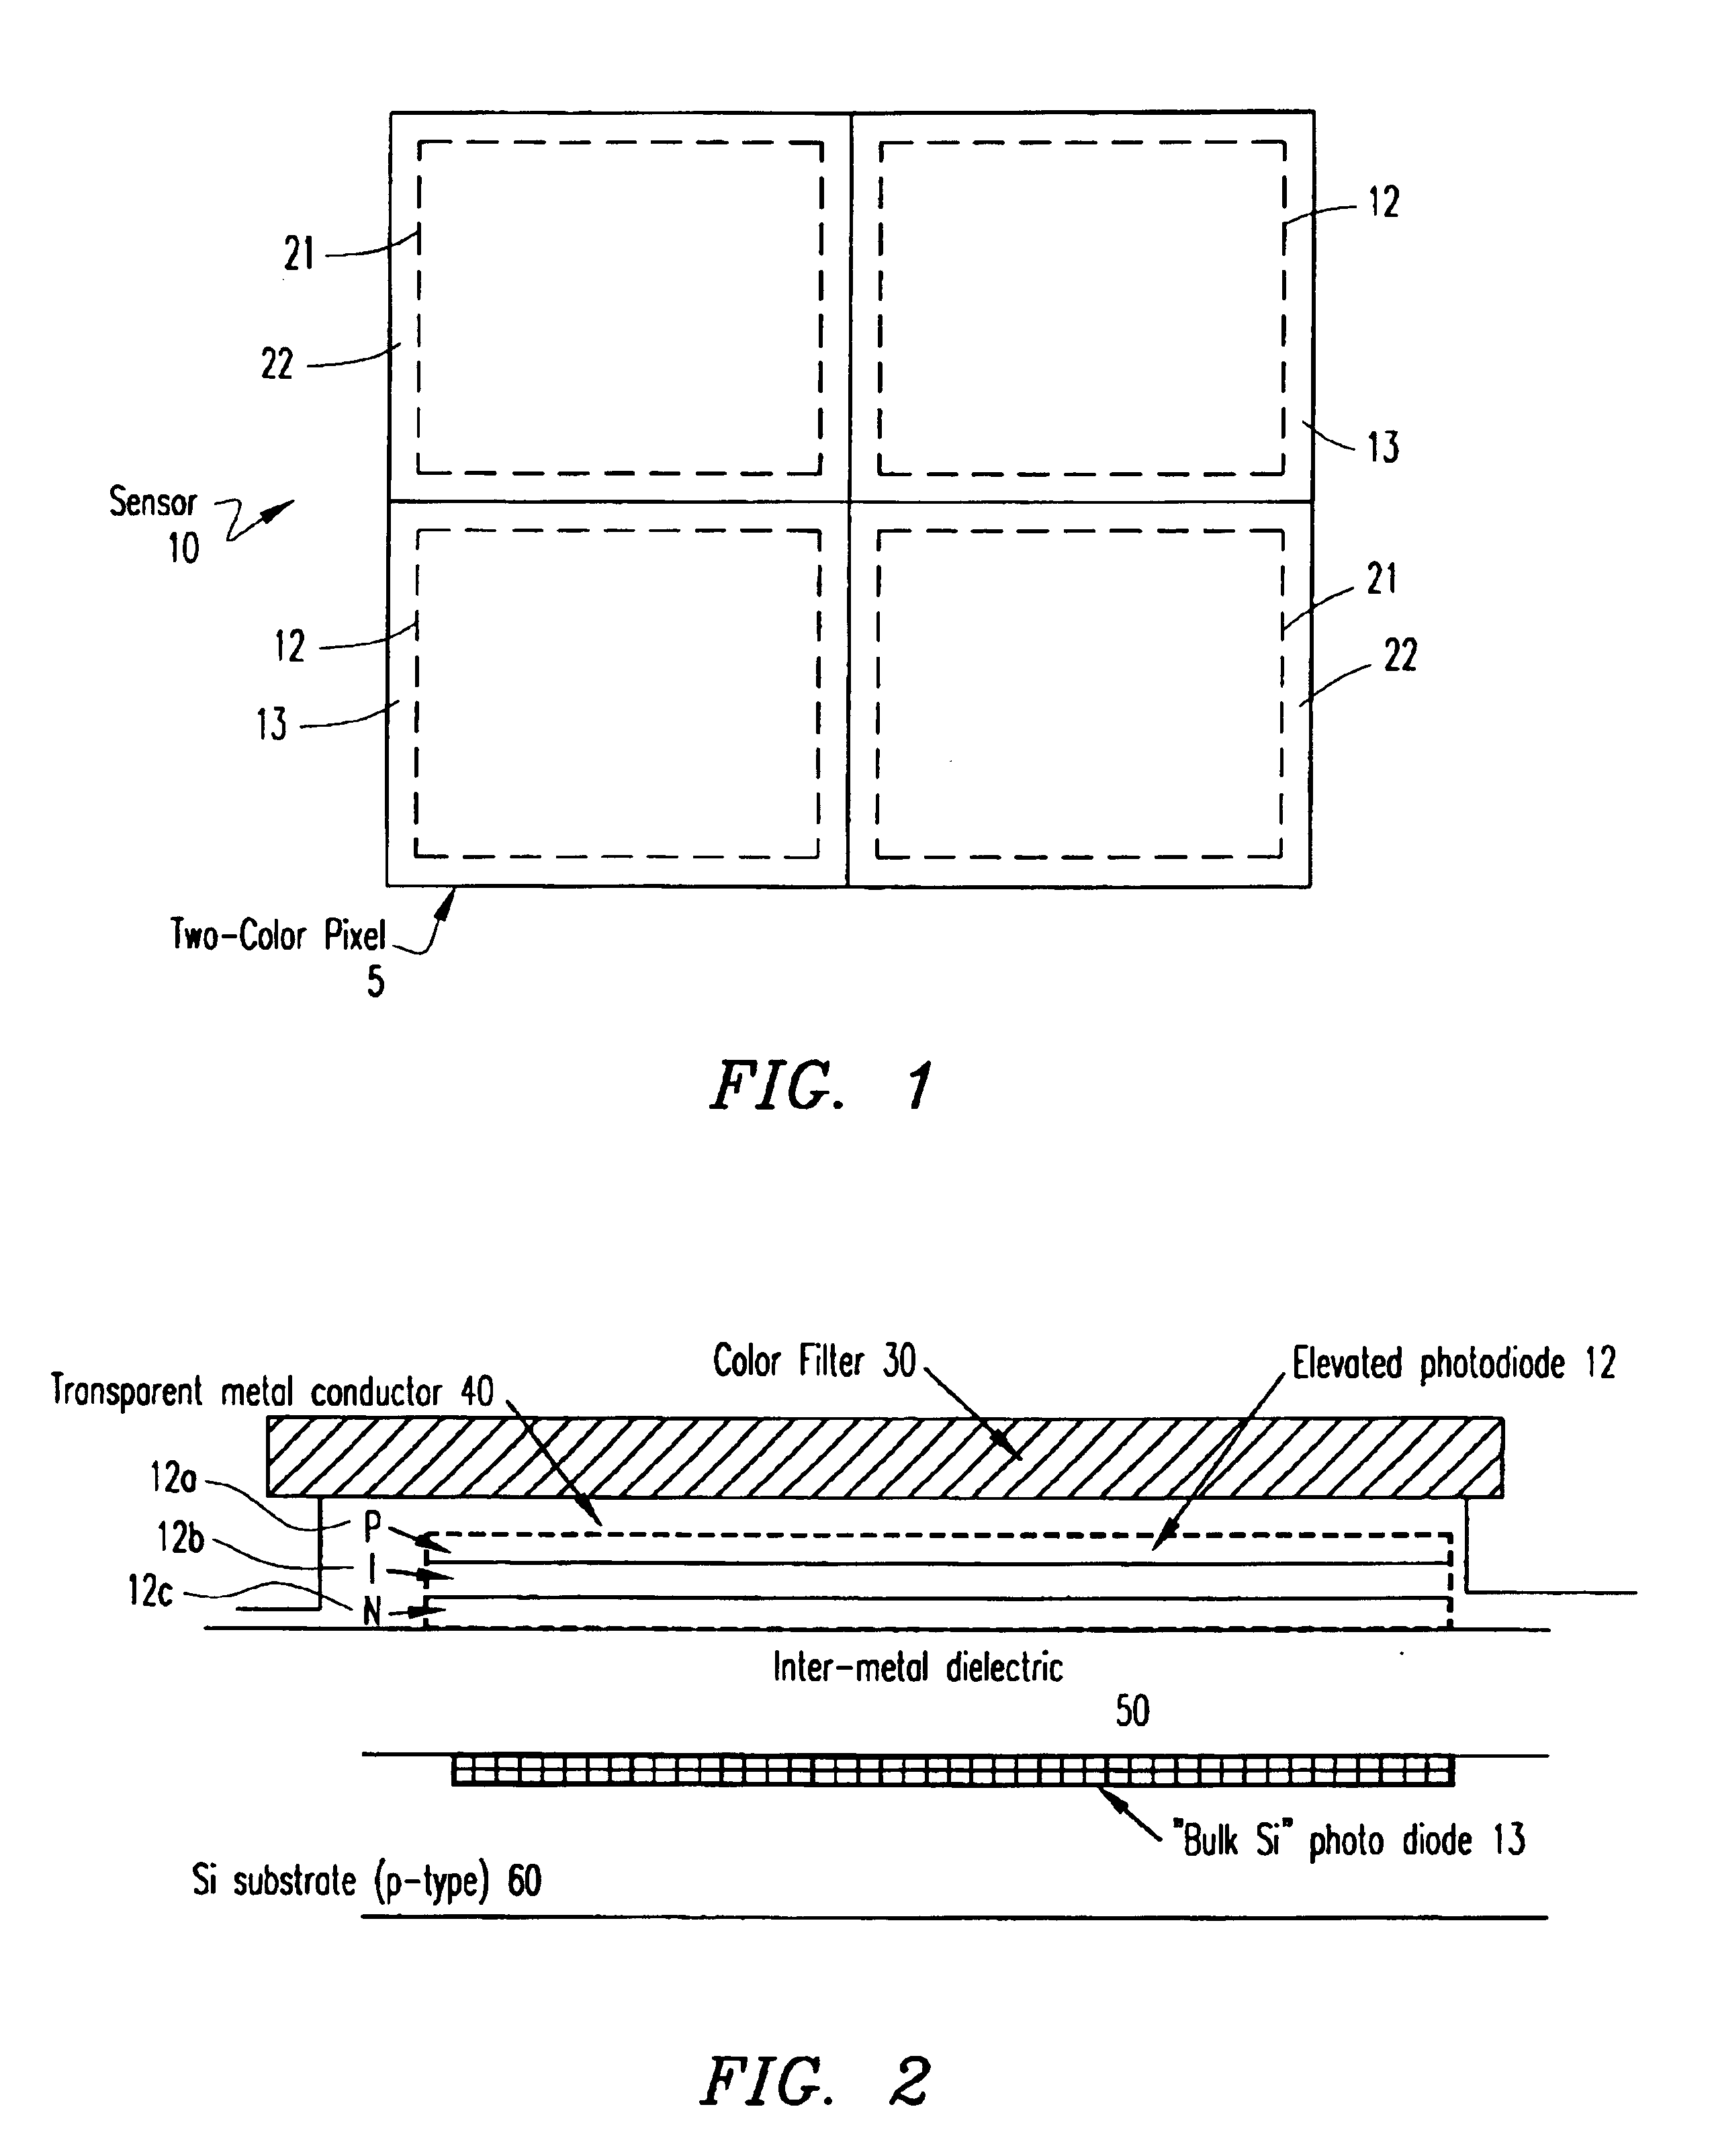 Two-color photo-detector and methods for demosaicing a two-color photo-detector array